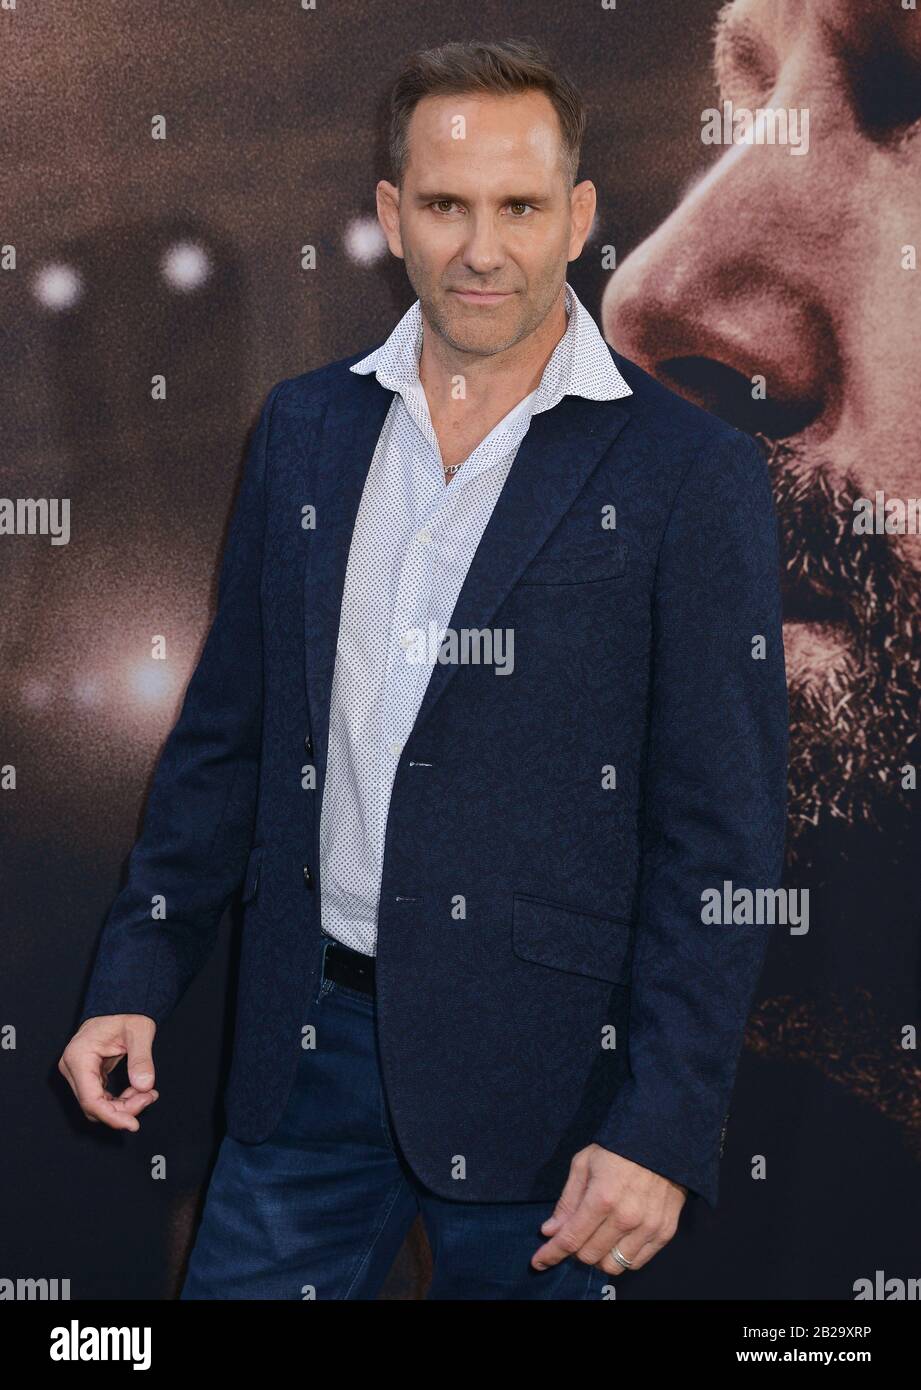 Los Angeles, USA. 01st Mar, 2020. Chris Bruno attend the premiere of Warner Bros Pictures' ' The Way Back' at Regal LA Live on March 01, 2020 in Los Angeles, California. Credit: Tsuni/USA/Alamy Live News Stock Photo